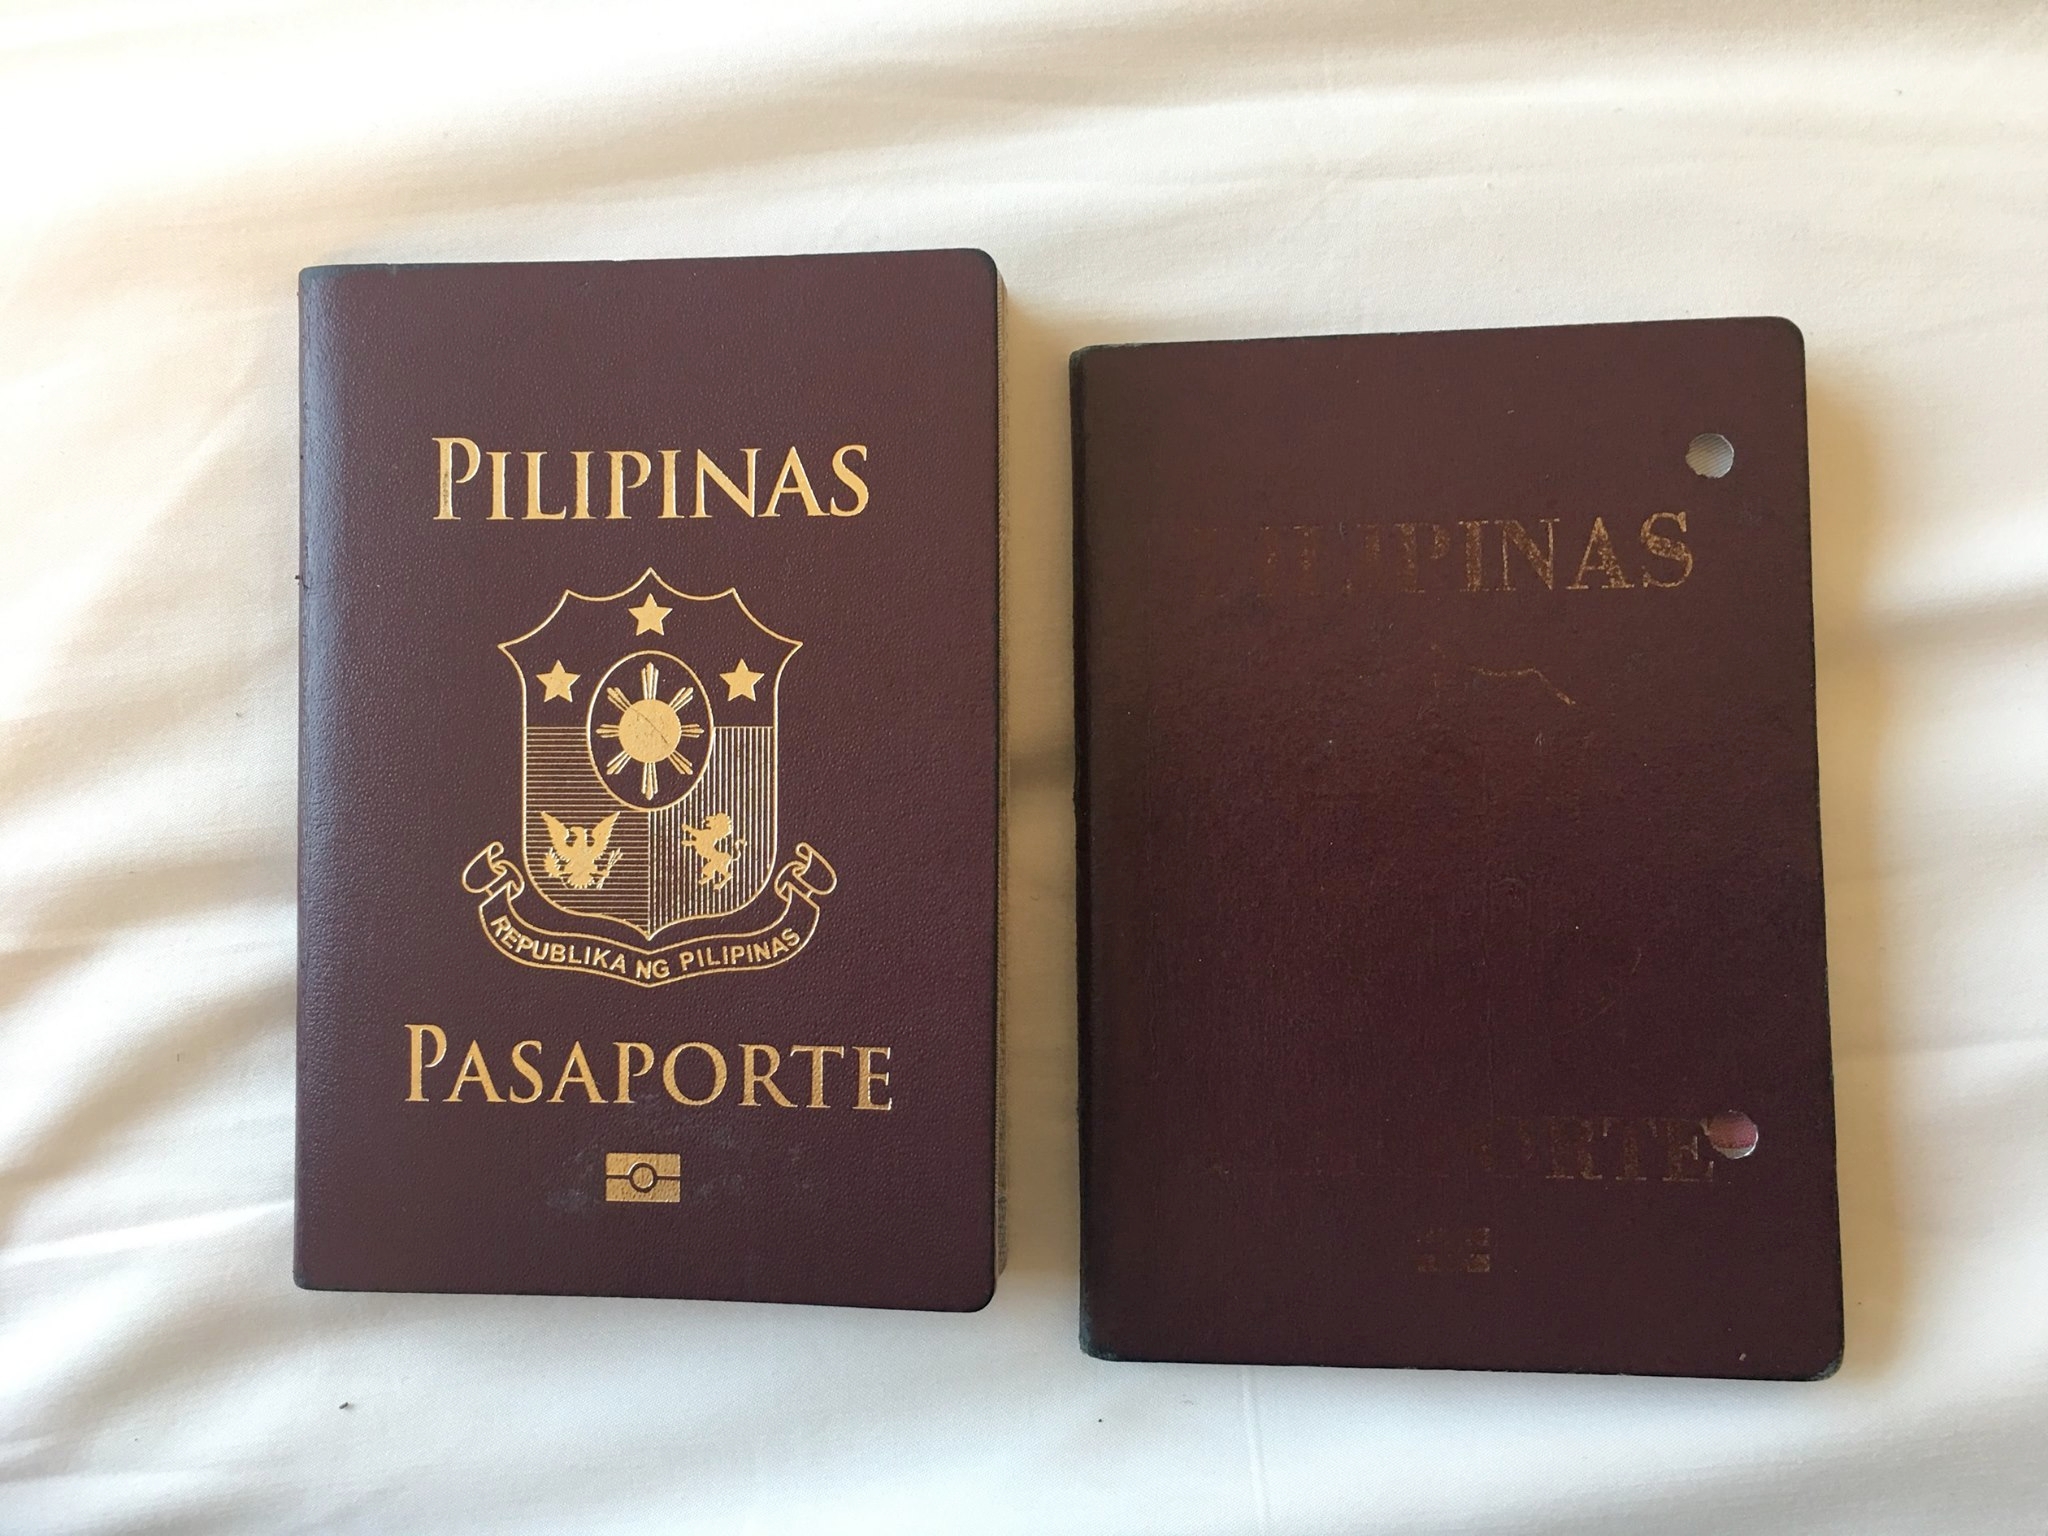 How To Apply For Dubai Or Uae Tourist Visa With Philippines Passport